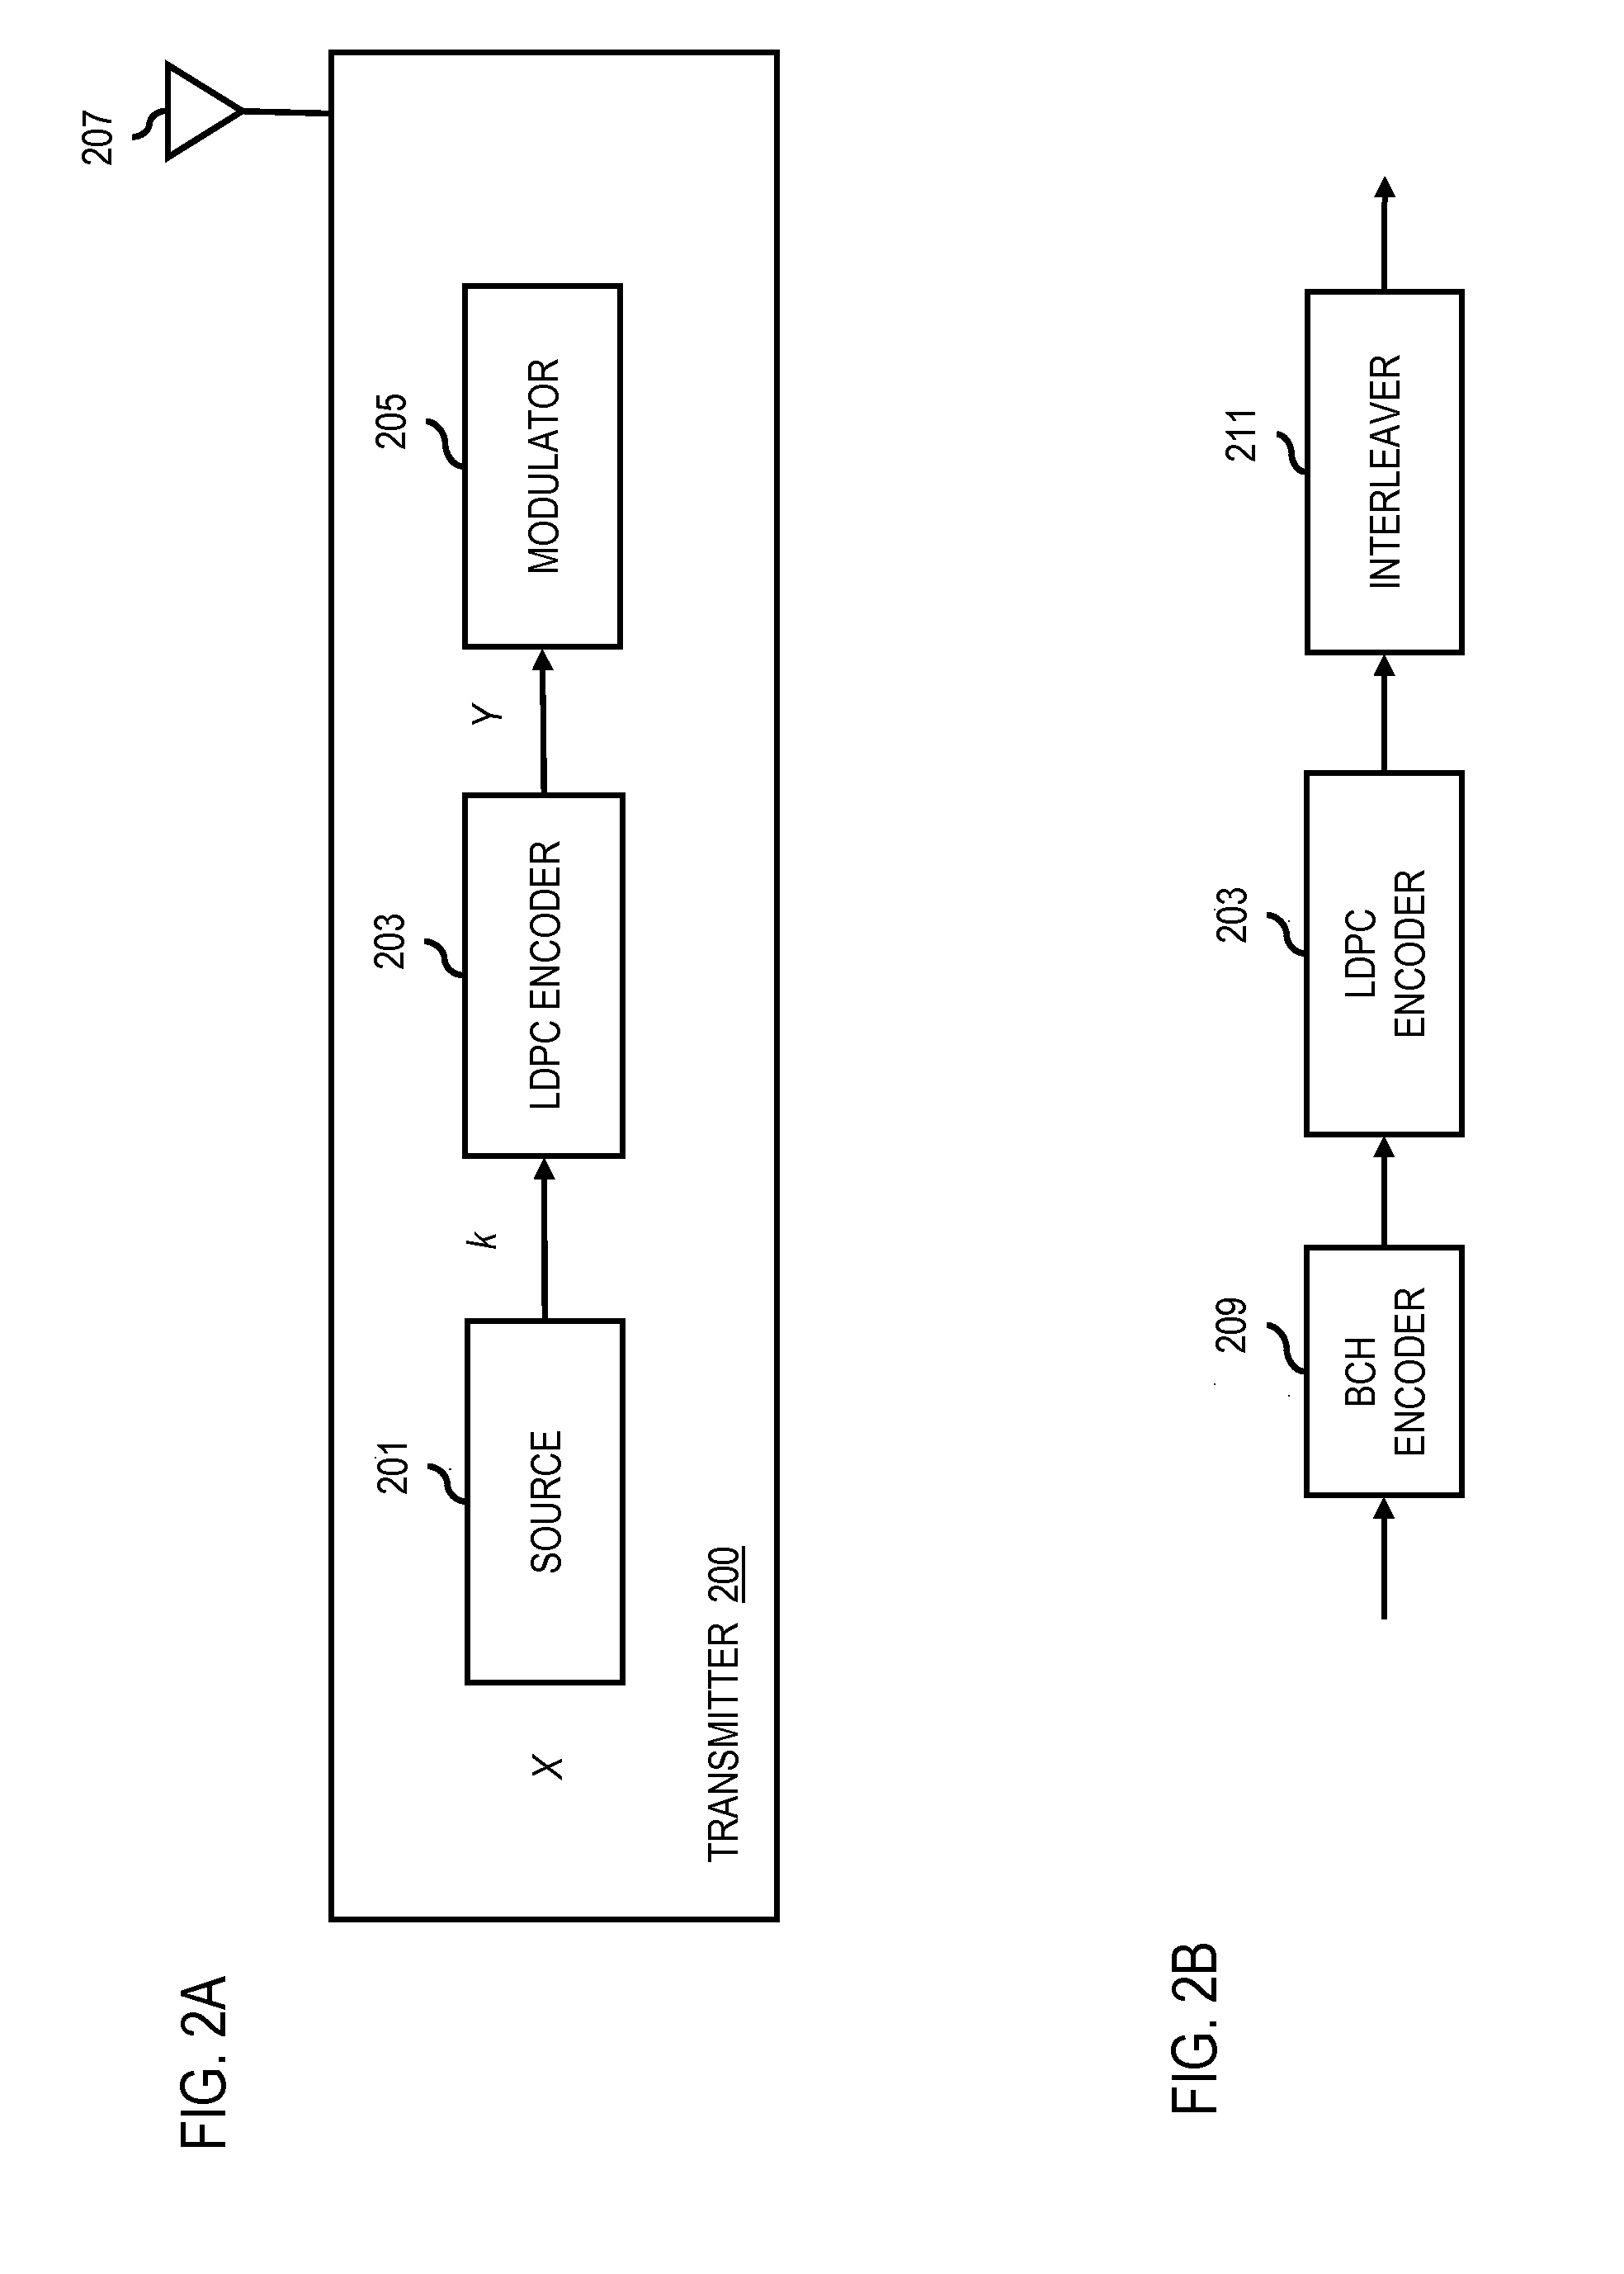 Method and system for providing low density parity check (LDPC) encoding and decoding